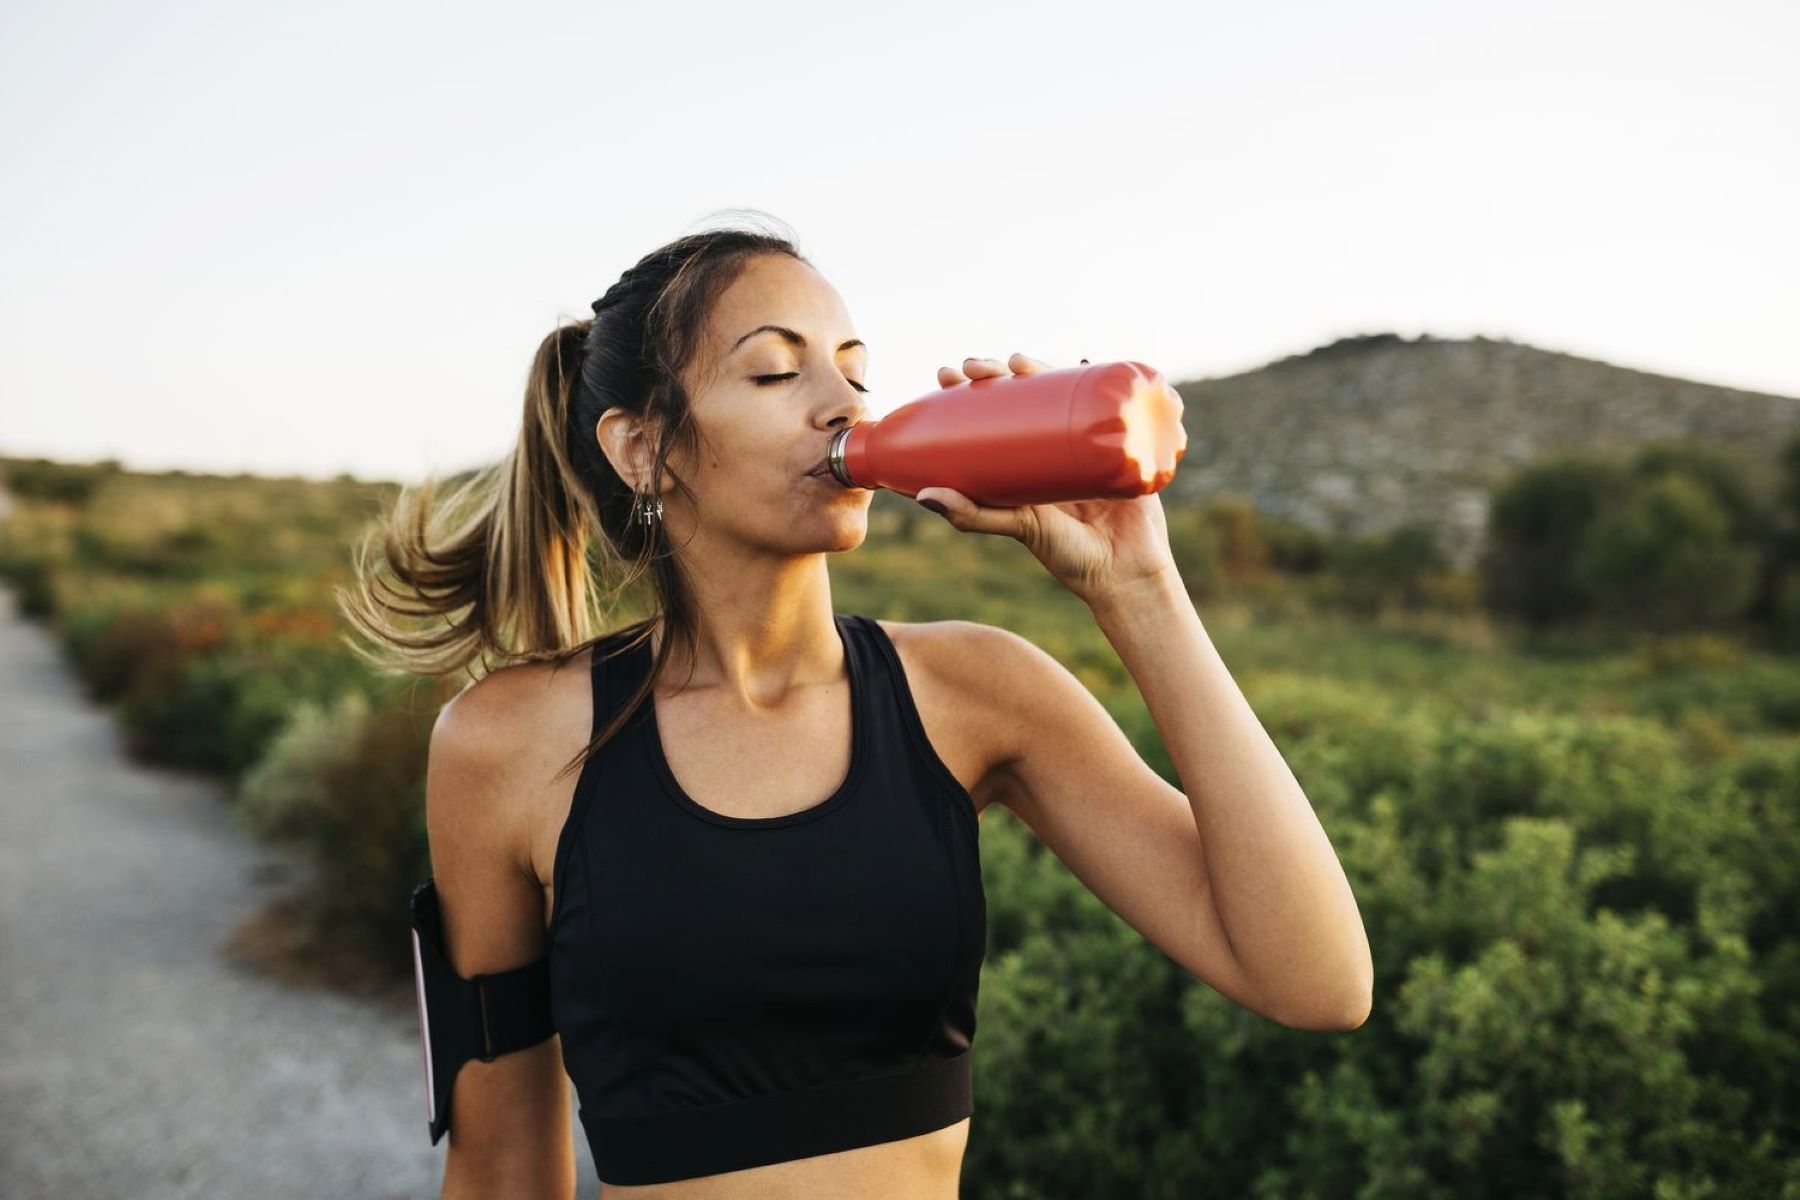 Top 5 Drinks For Races And Training Sessions To Stay Hydrated